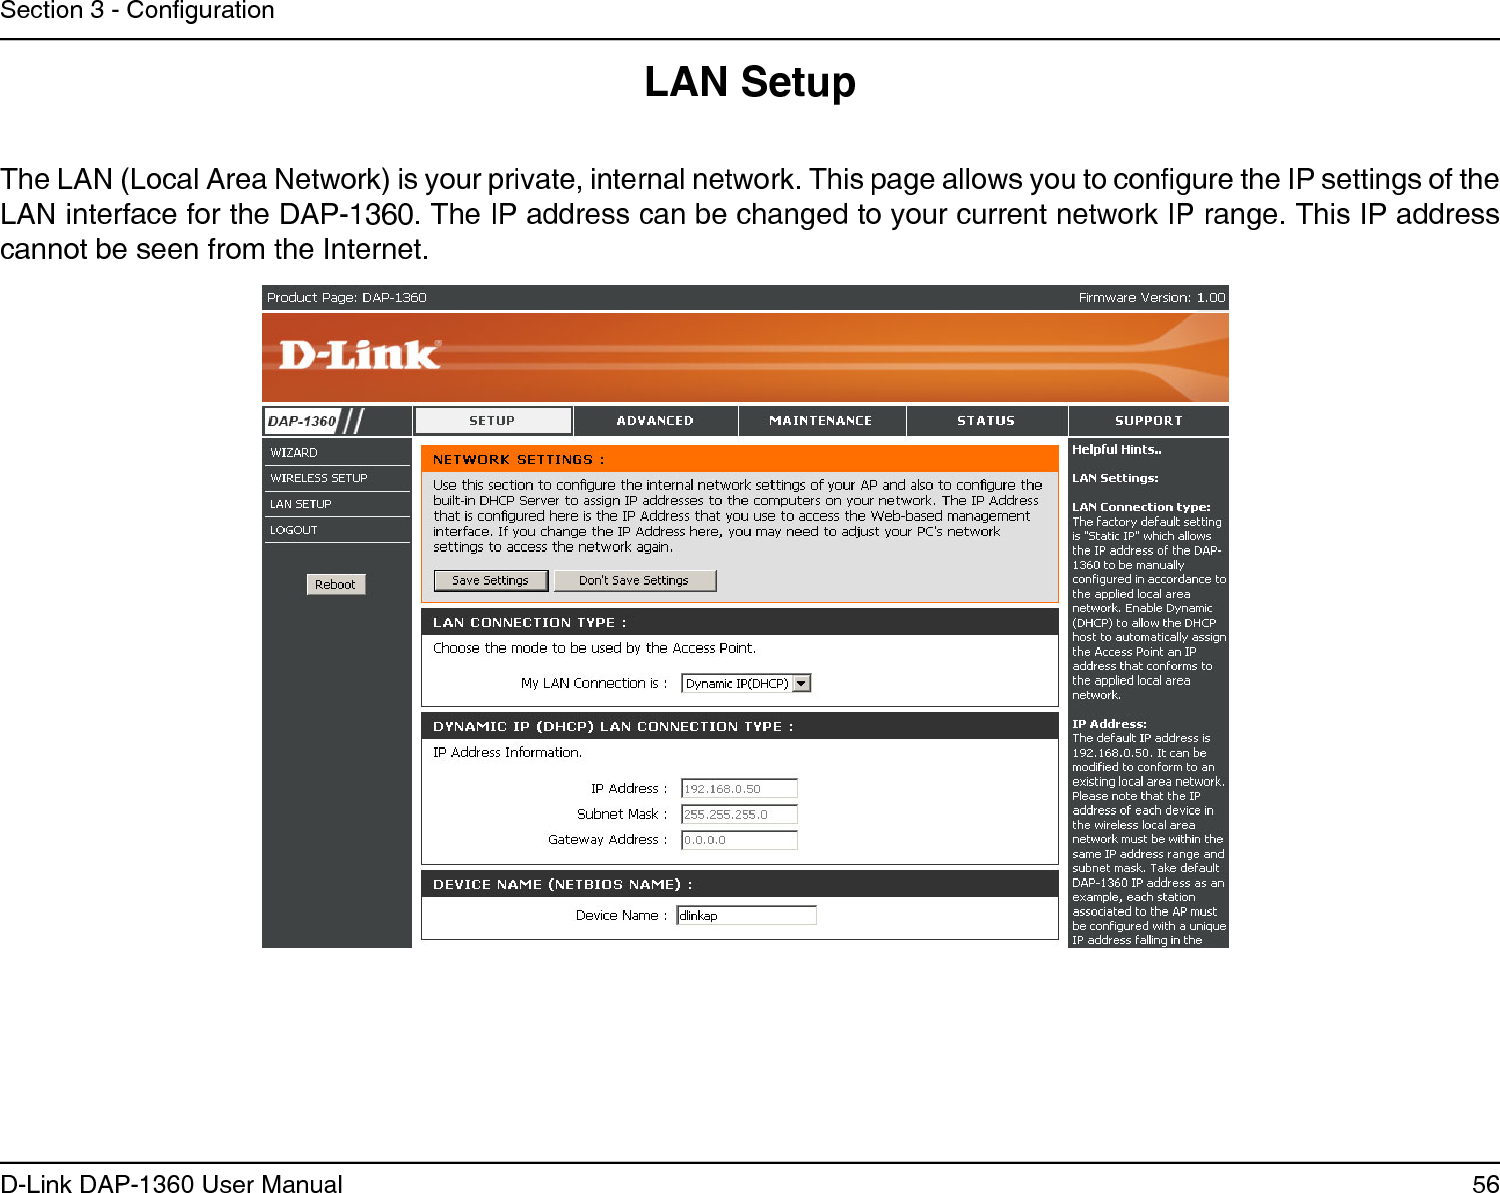 56D-Link DAP-1360 User ManualSection 3 - CongurationLAN SetupThe LAN (Local Area Network) is your private, internal network. This page allows you to congure the IP settings of the LAN interface for the DAP-1360. The IP address can be changed to your current network IP range. This IP address cannot be seen from the Internet.